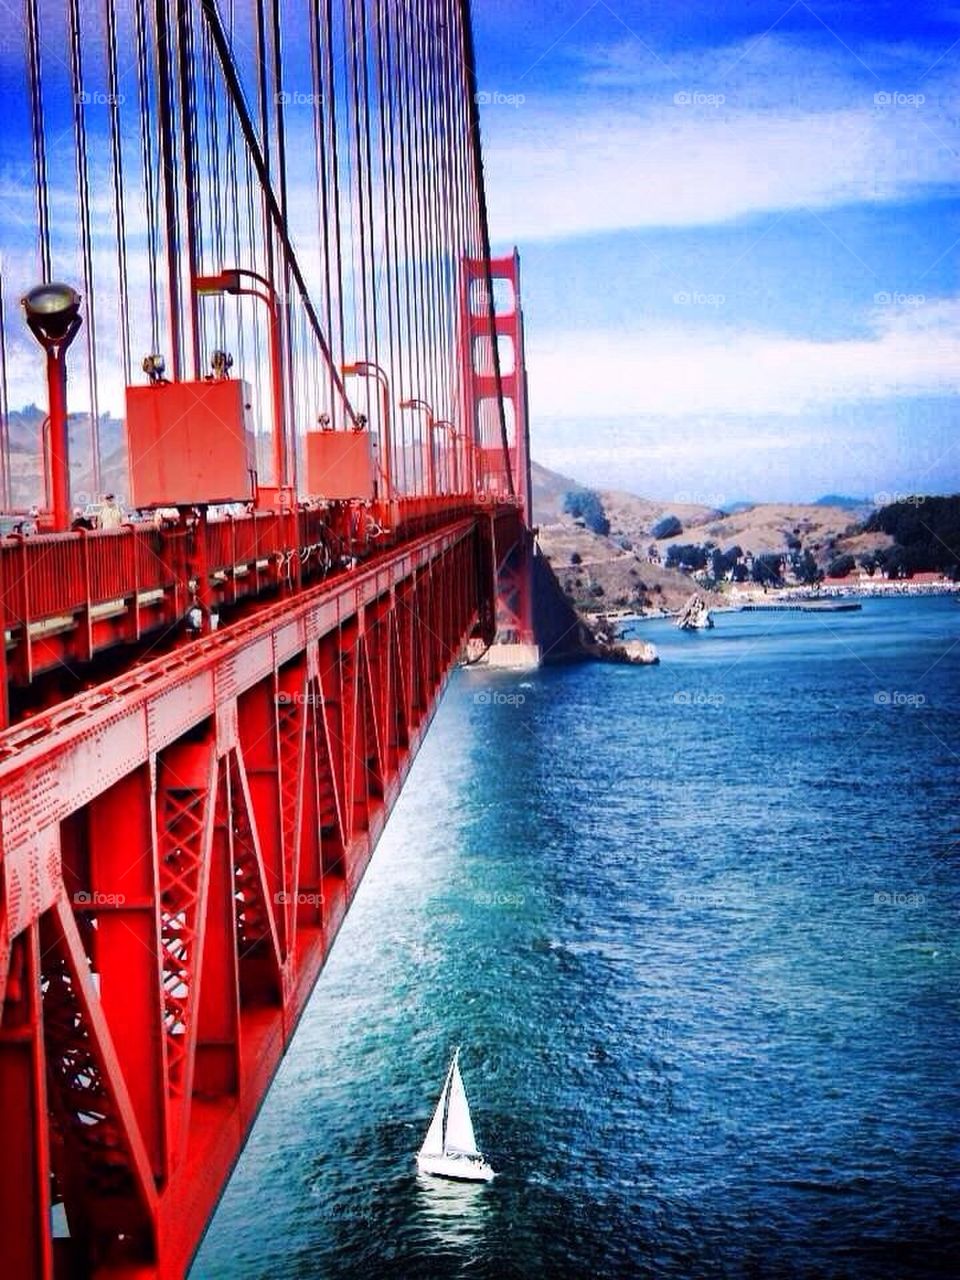 Sailing under the Goldengate